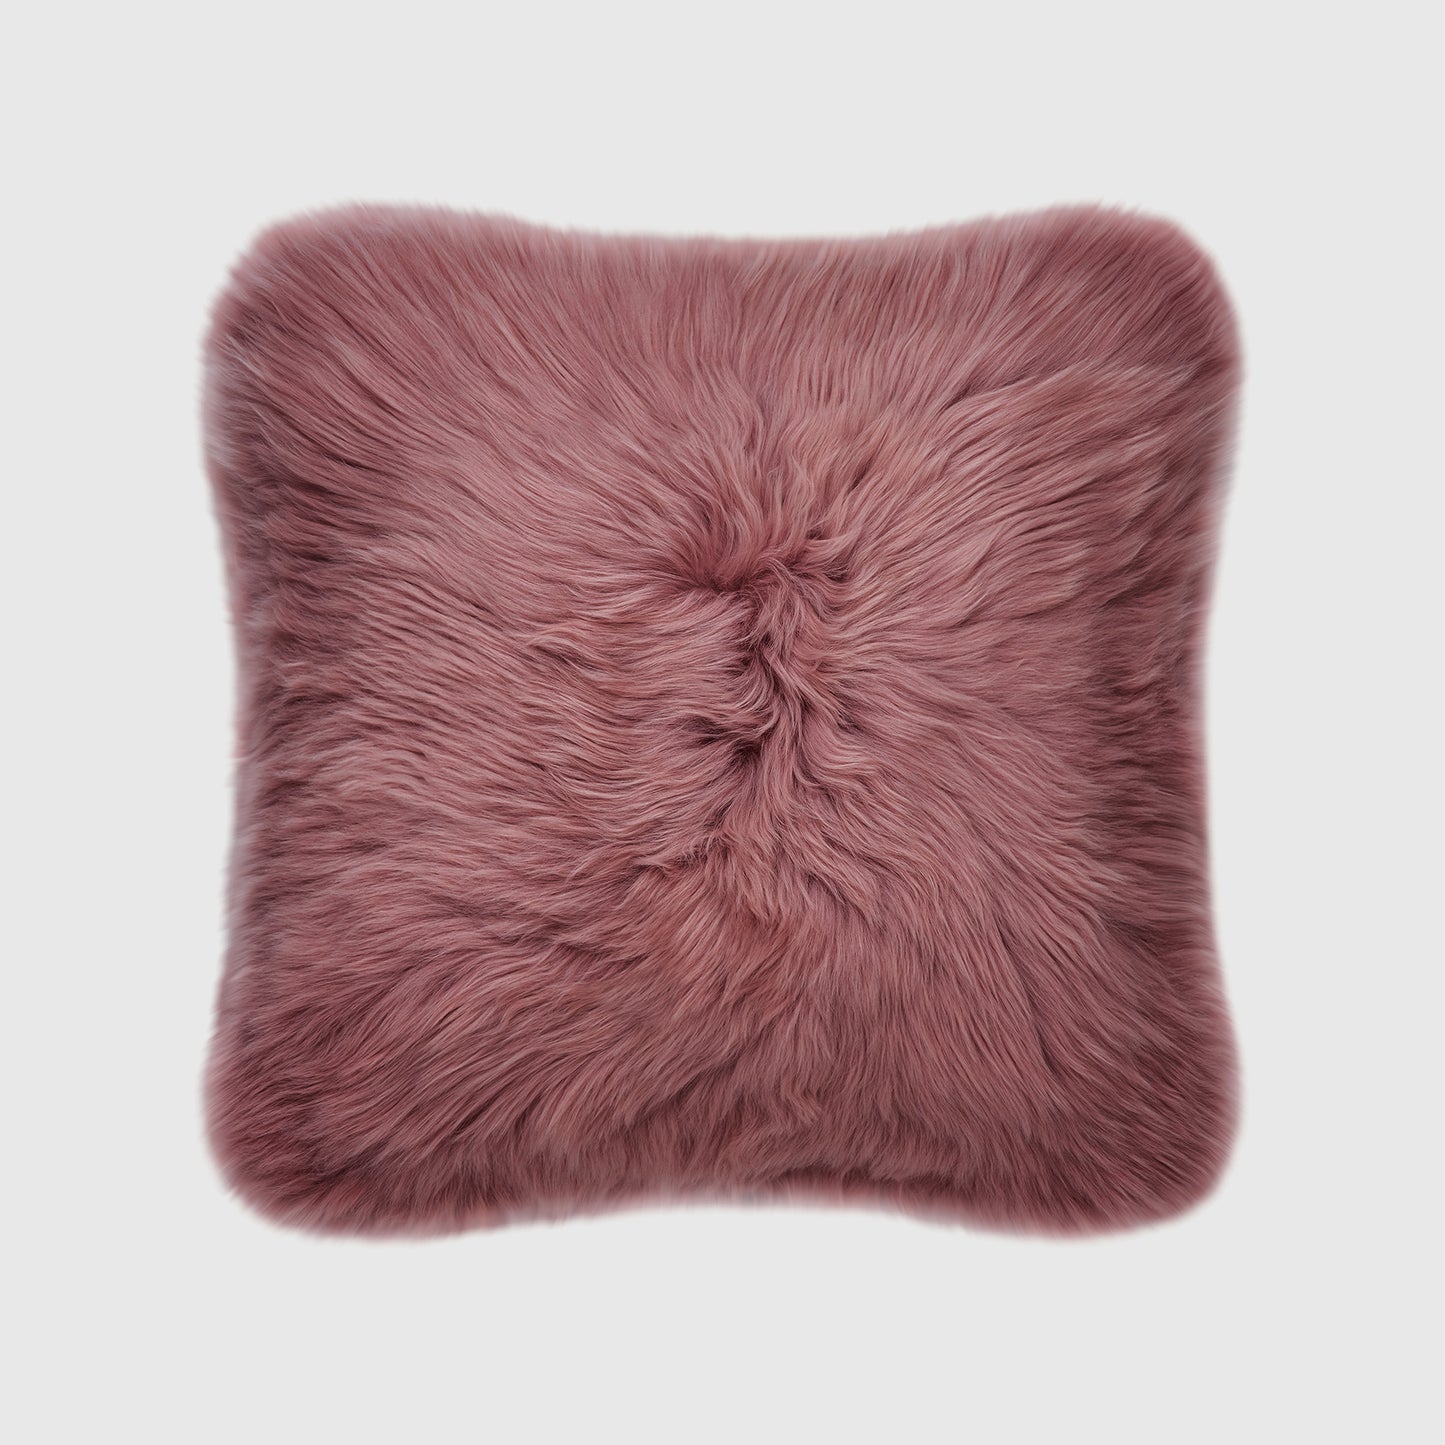 The Mood | Charlie Sheepskin Double-sided 18"x18" Pillow, Marsala Red